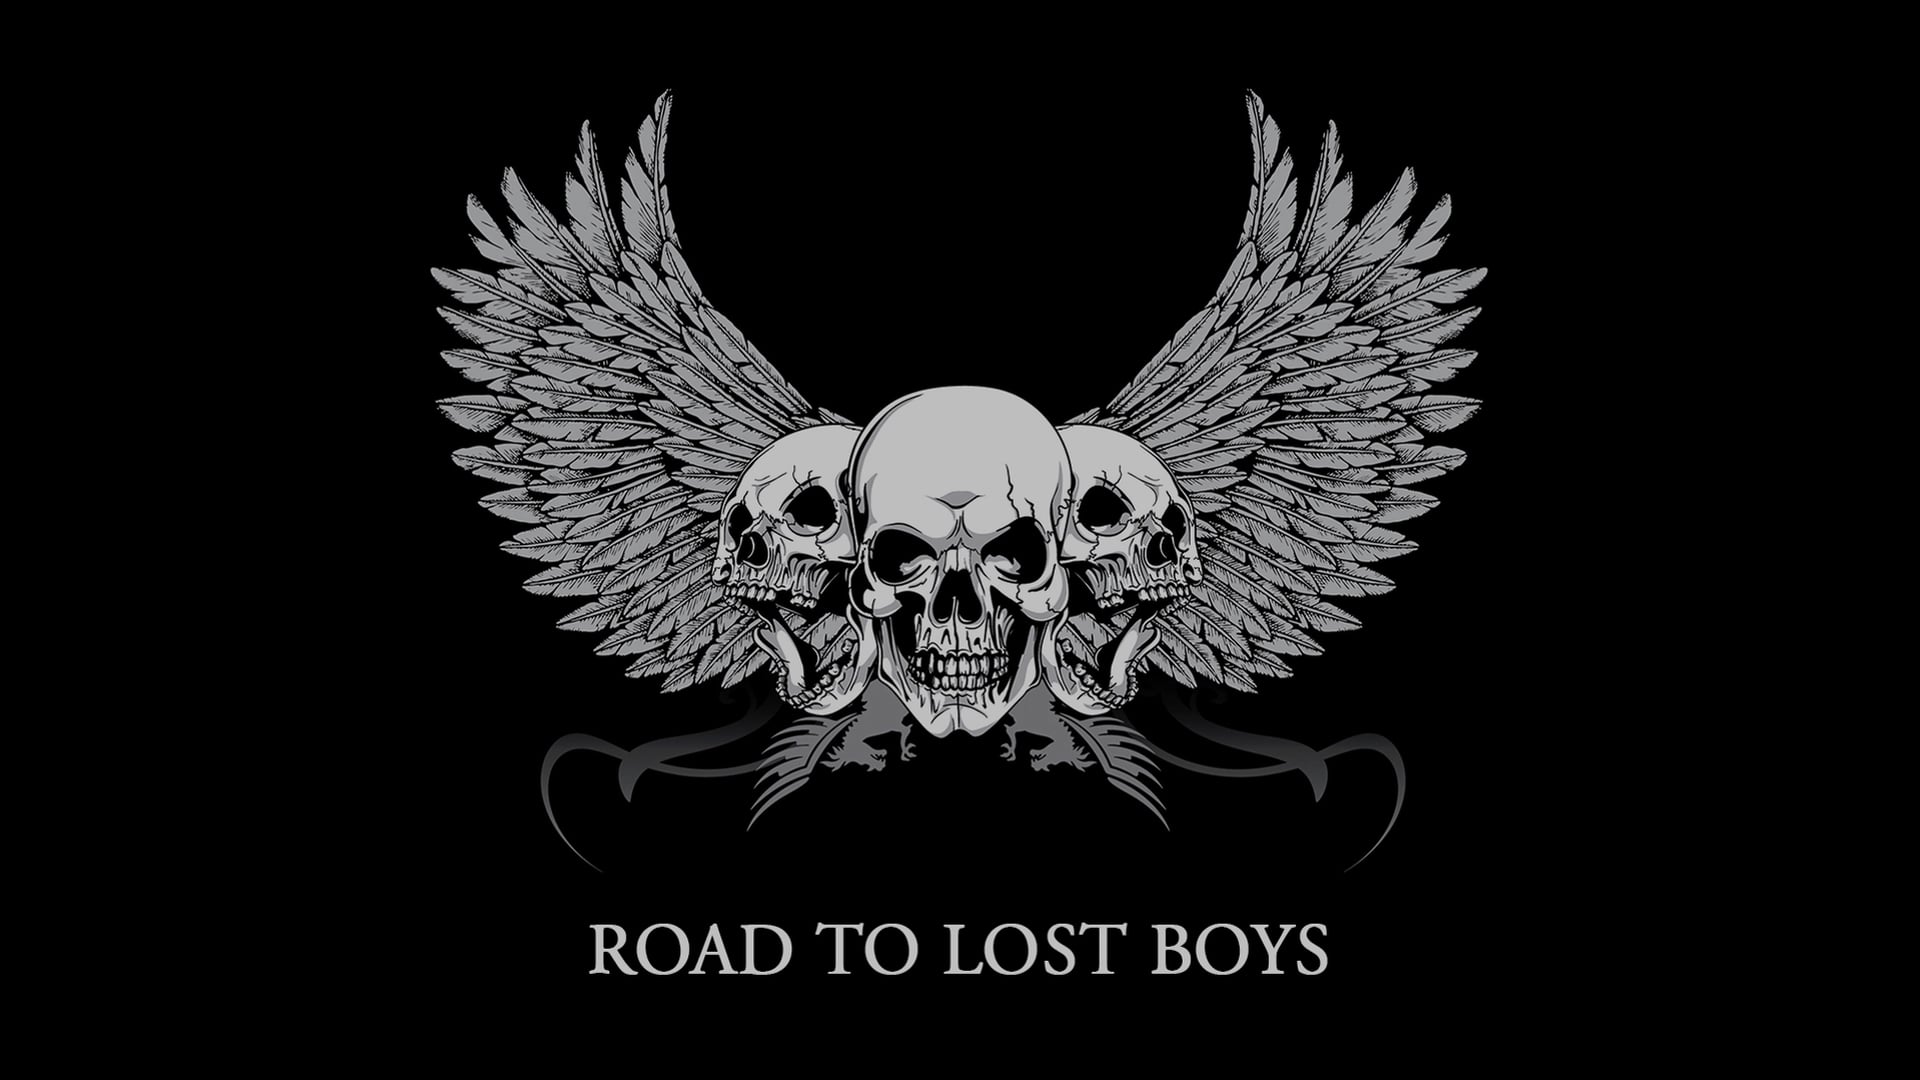 ROAD TO LOST BOYS